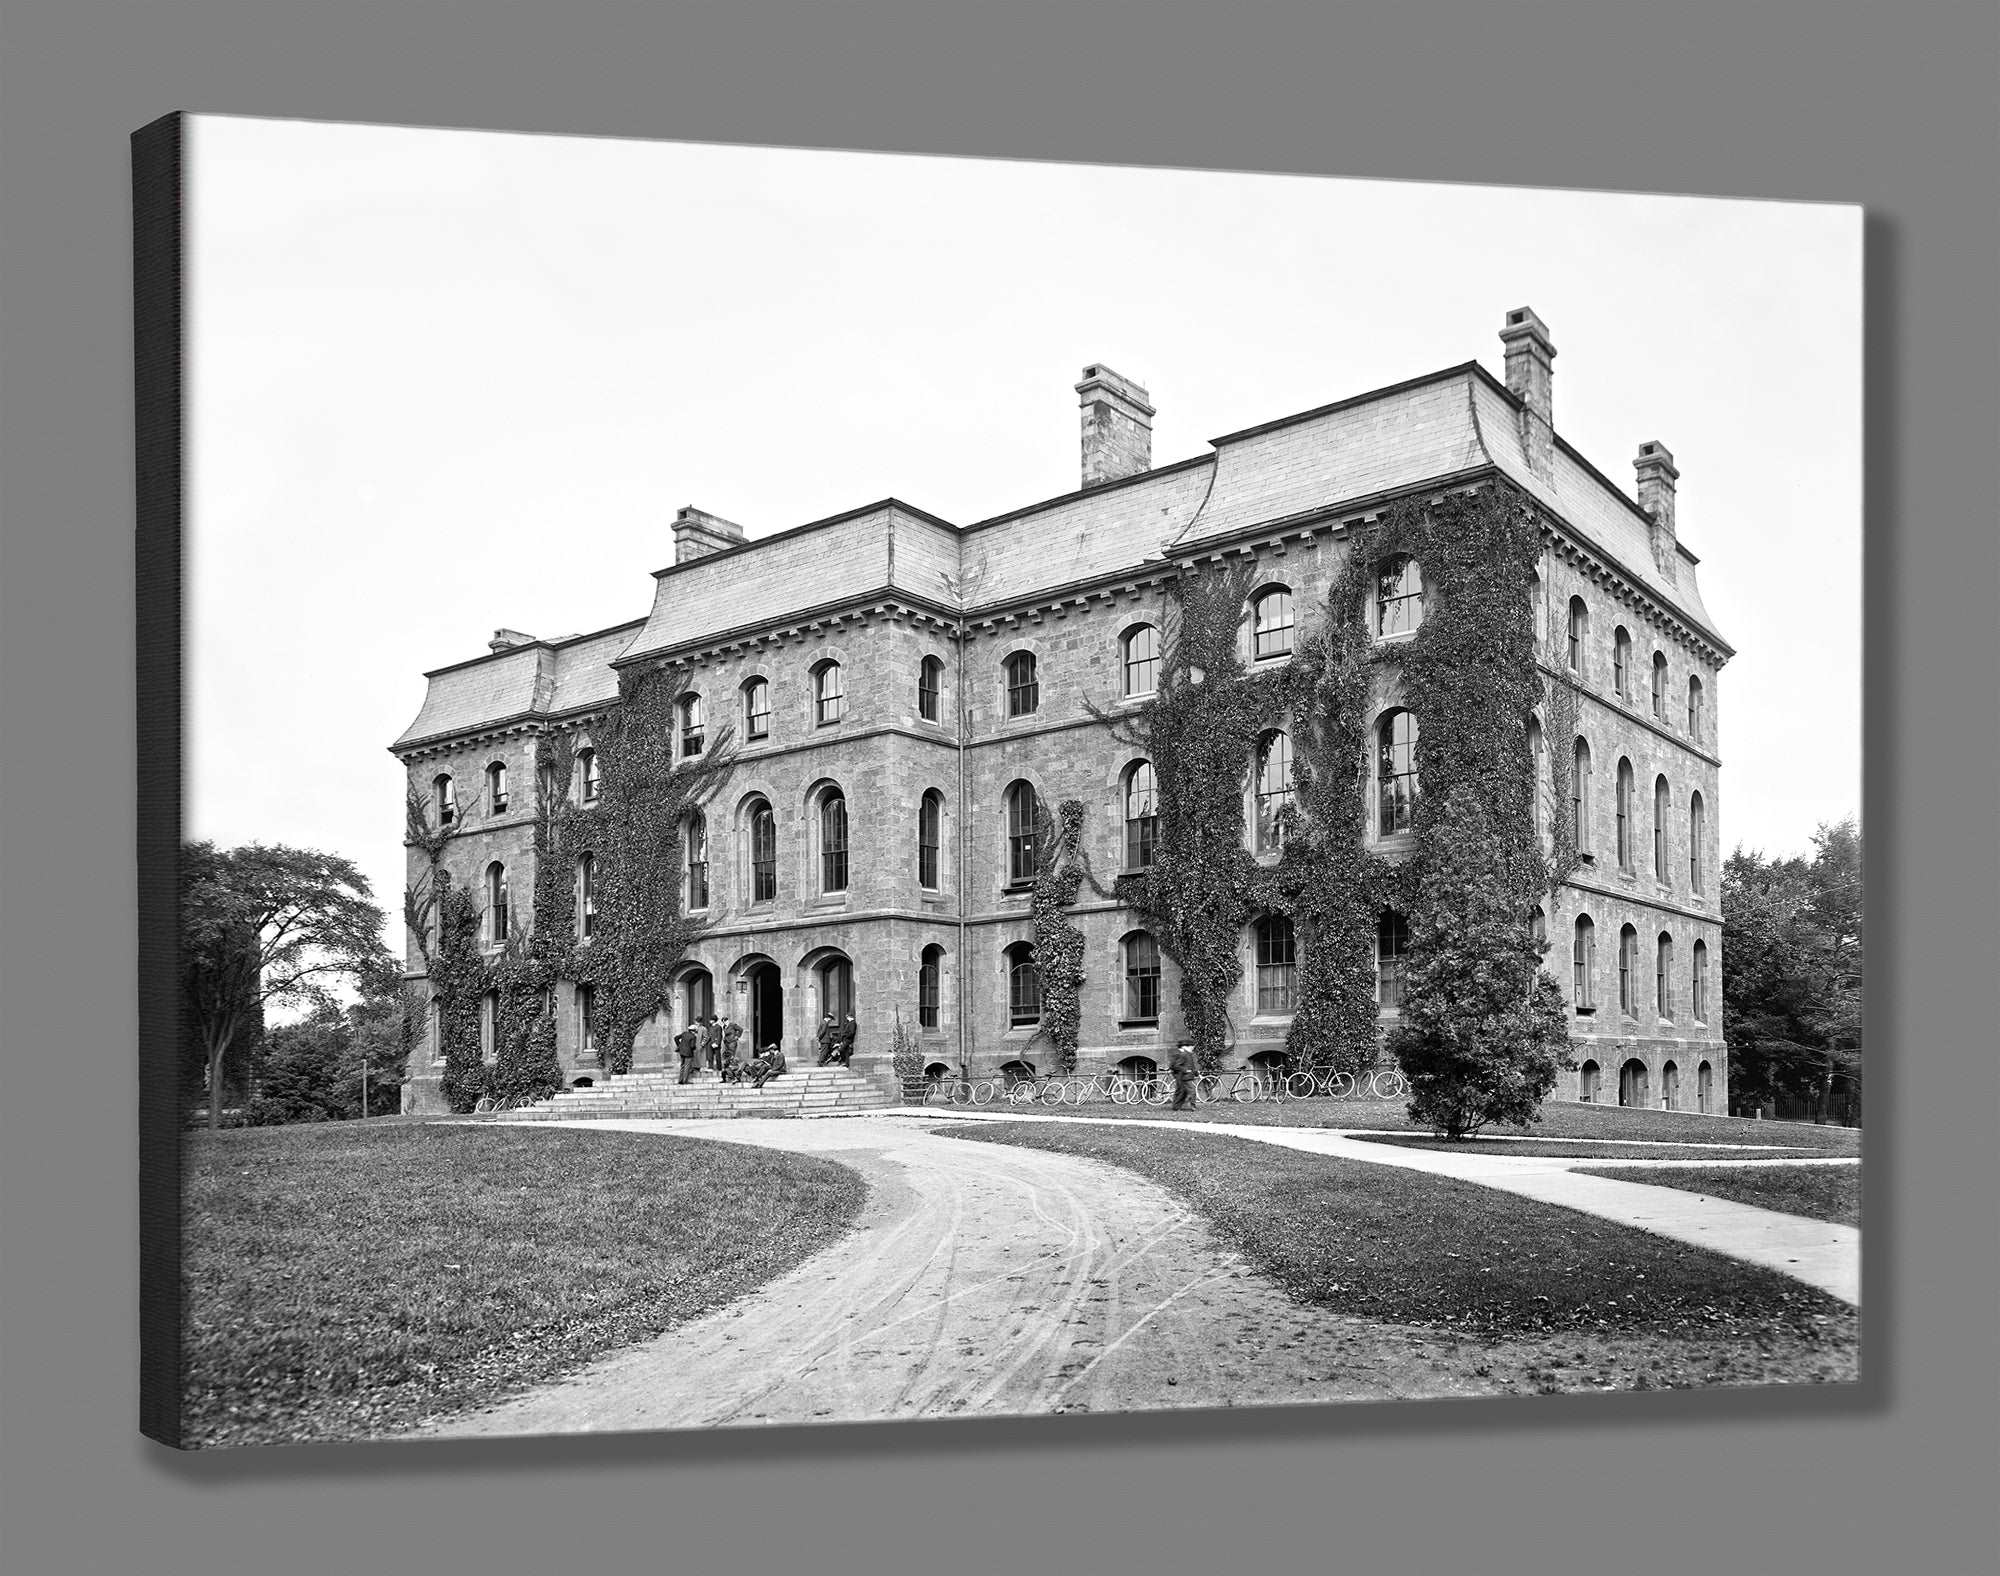 A fine art canvas print of a vintage photo of Anderson Hall covered in ivy